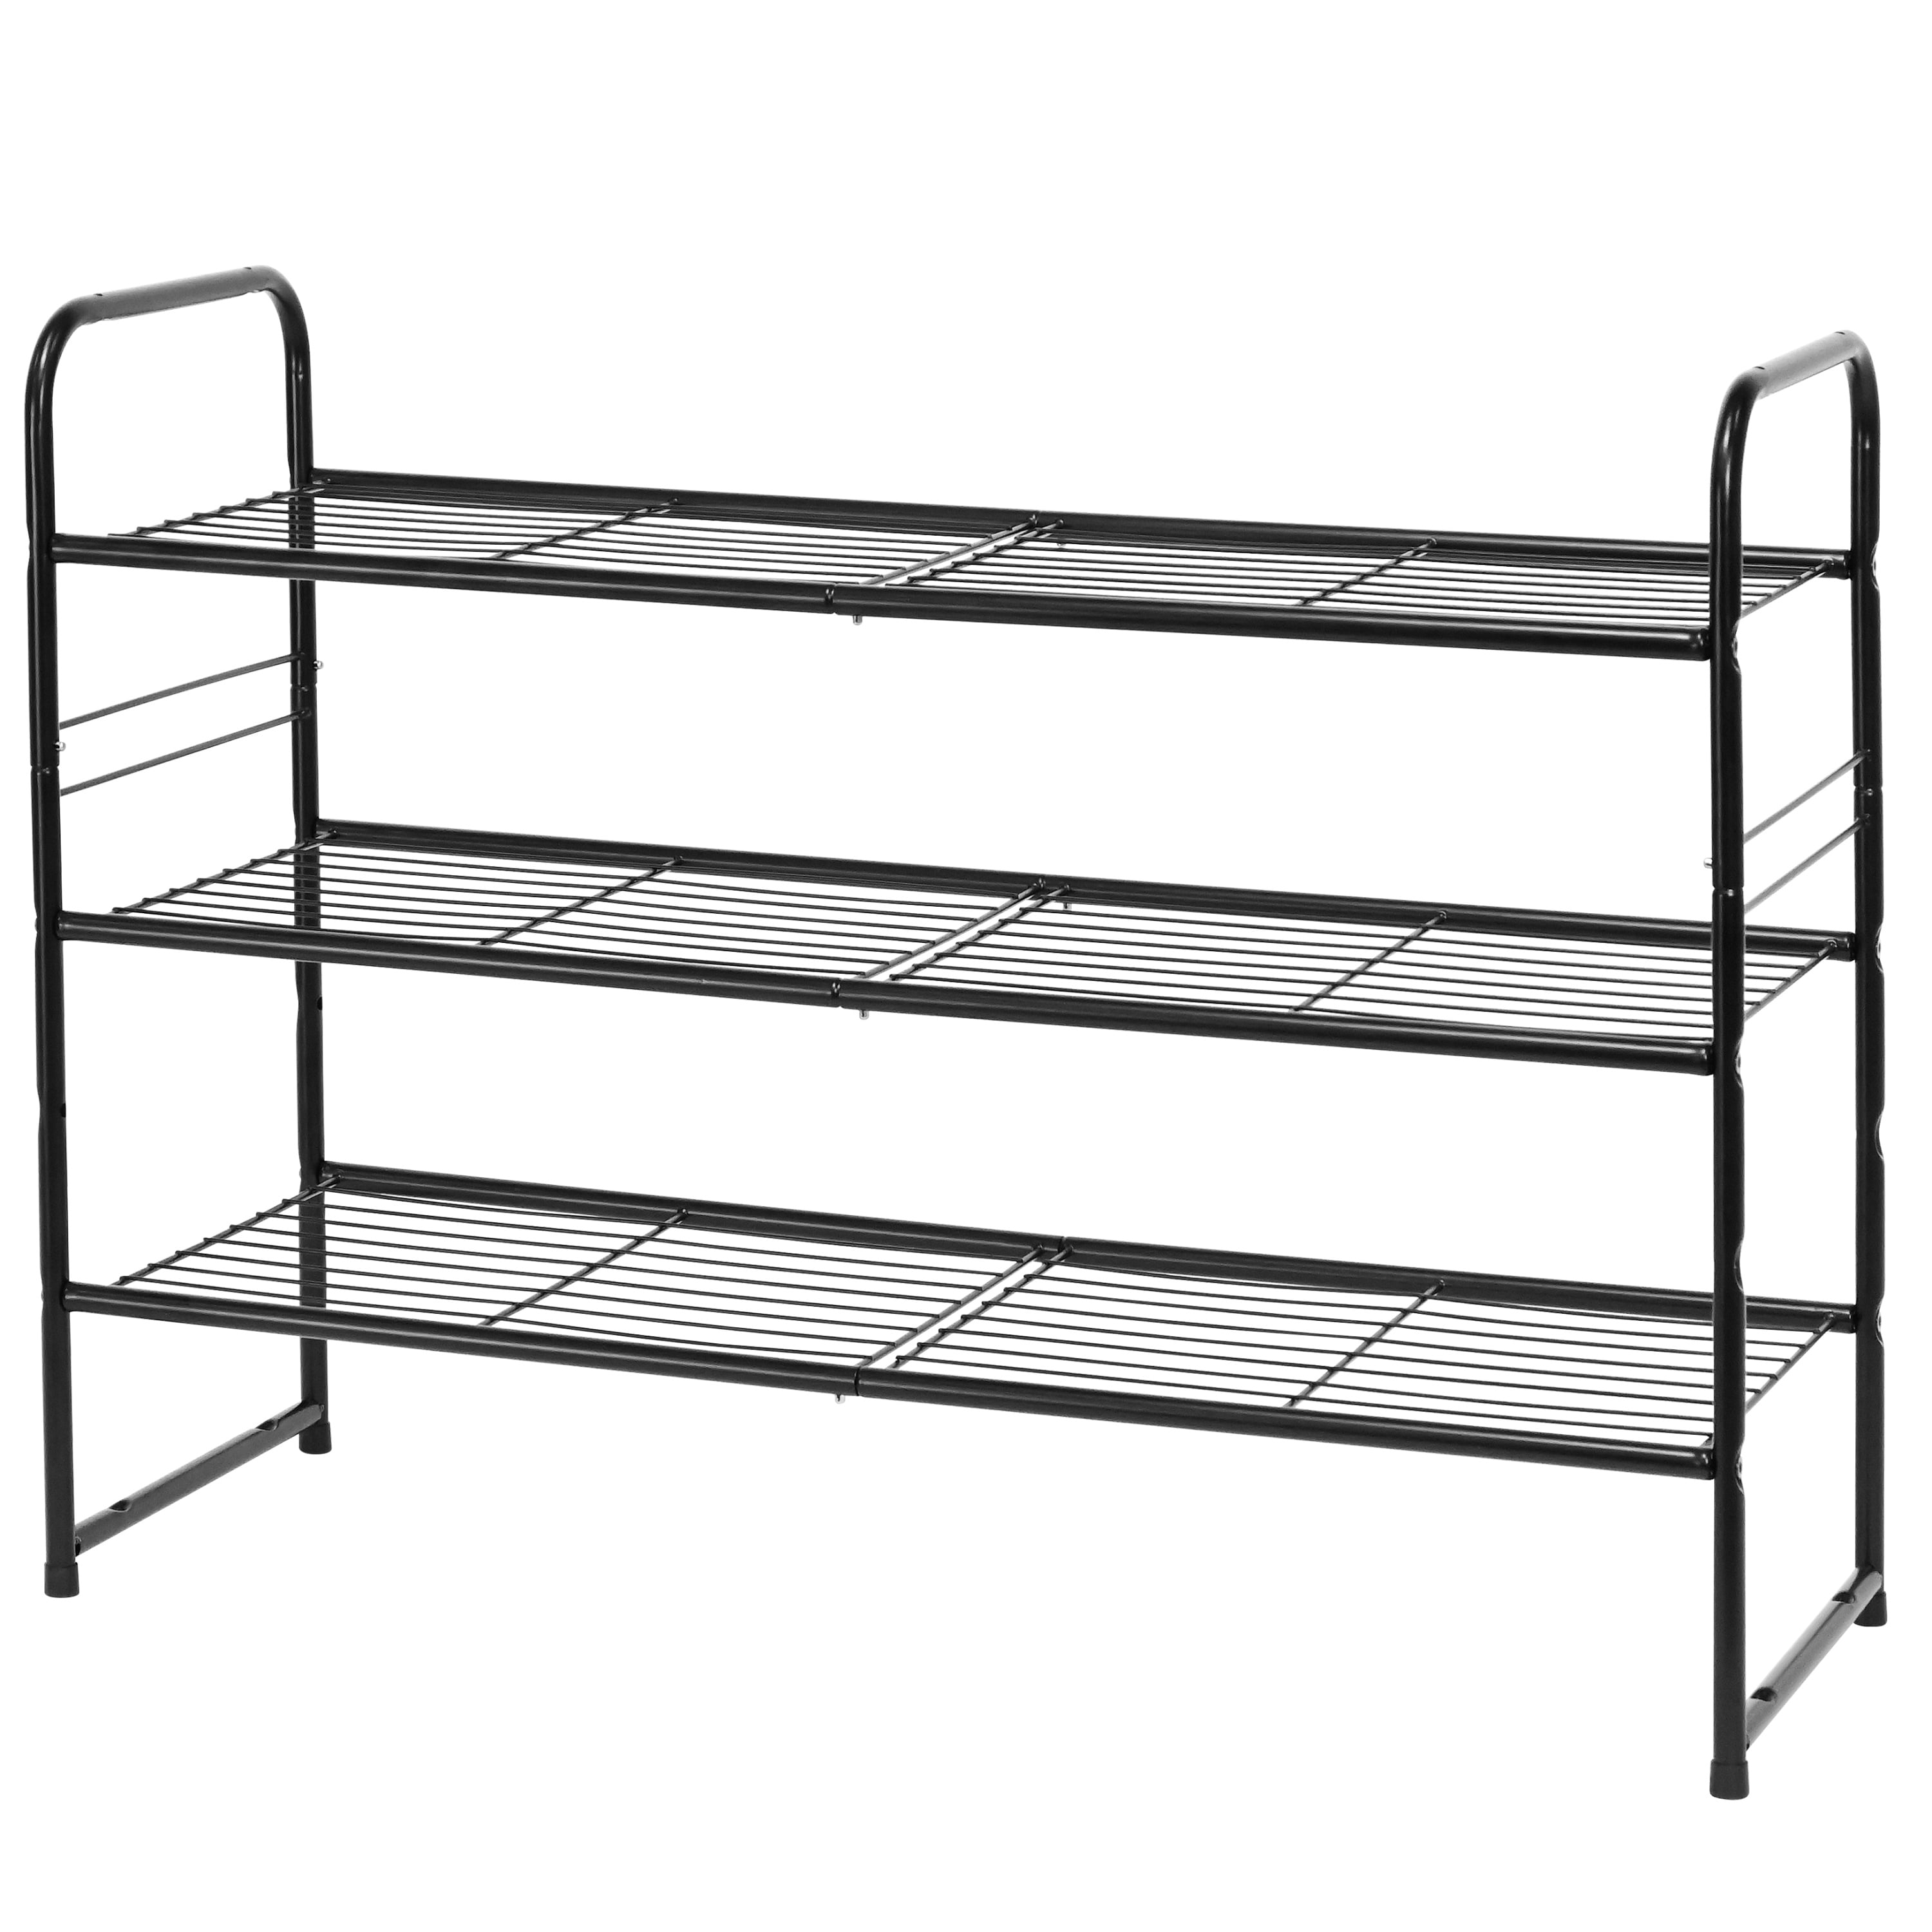 SUFAUY 3-Tier Shoe Rack, Stackable Shoe Shelf Storage Organizer for  Entryway Closet, Extra Large Capacity, Wire Grid, White